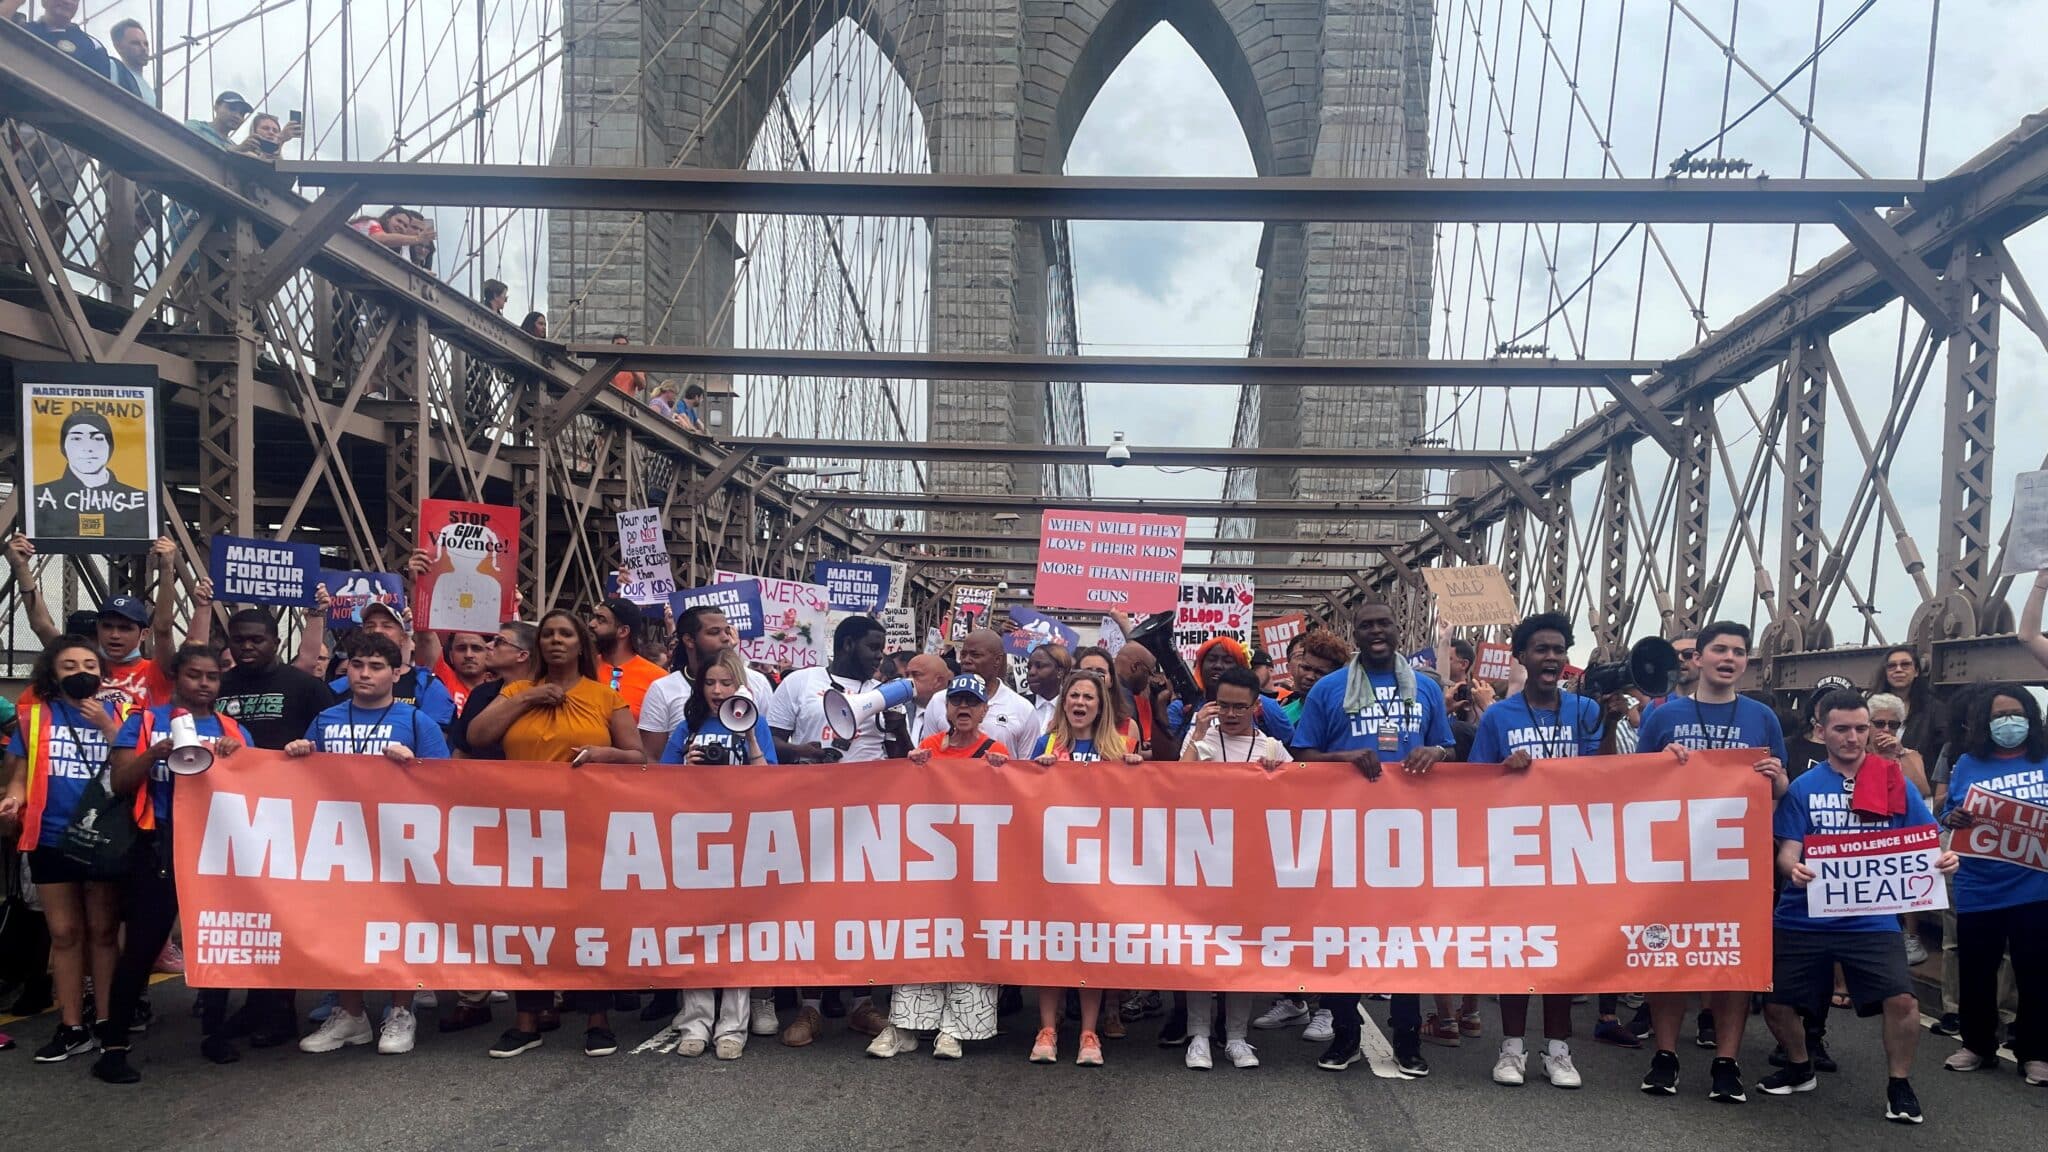 People in New York City protest gun violence as they cross the Brooklyn Bridge during the "March for Our Lives" rally June 11, 2022. (CNS photo/Eric Cox, Reuters)